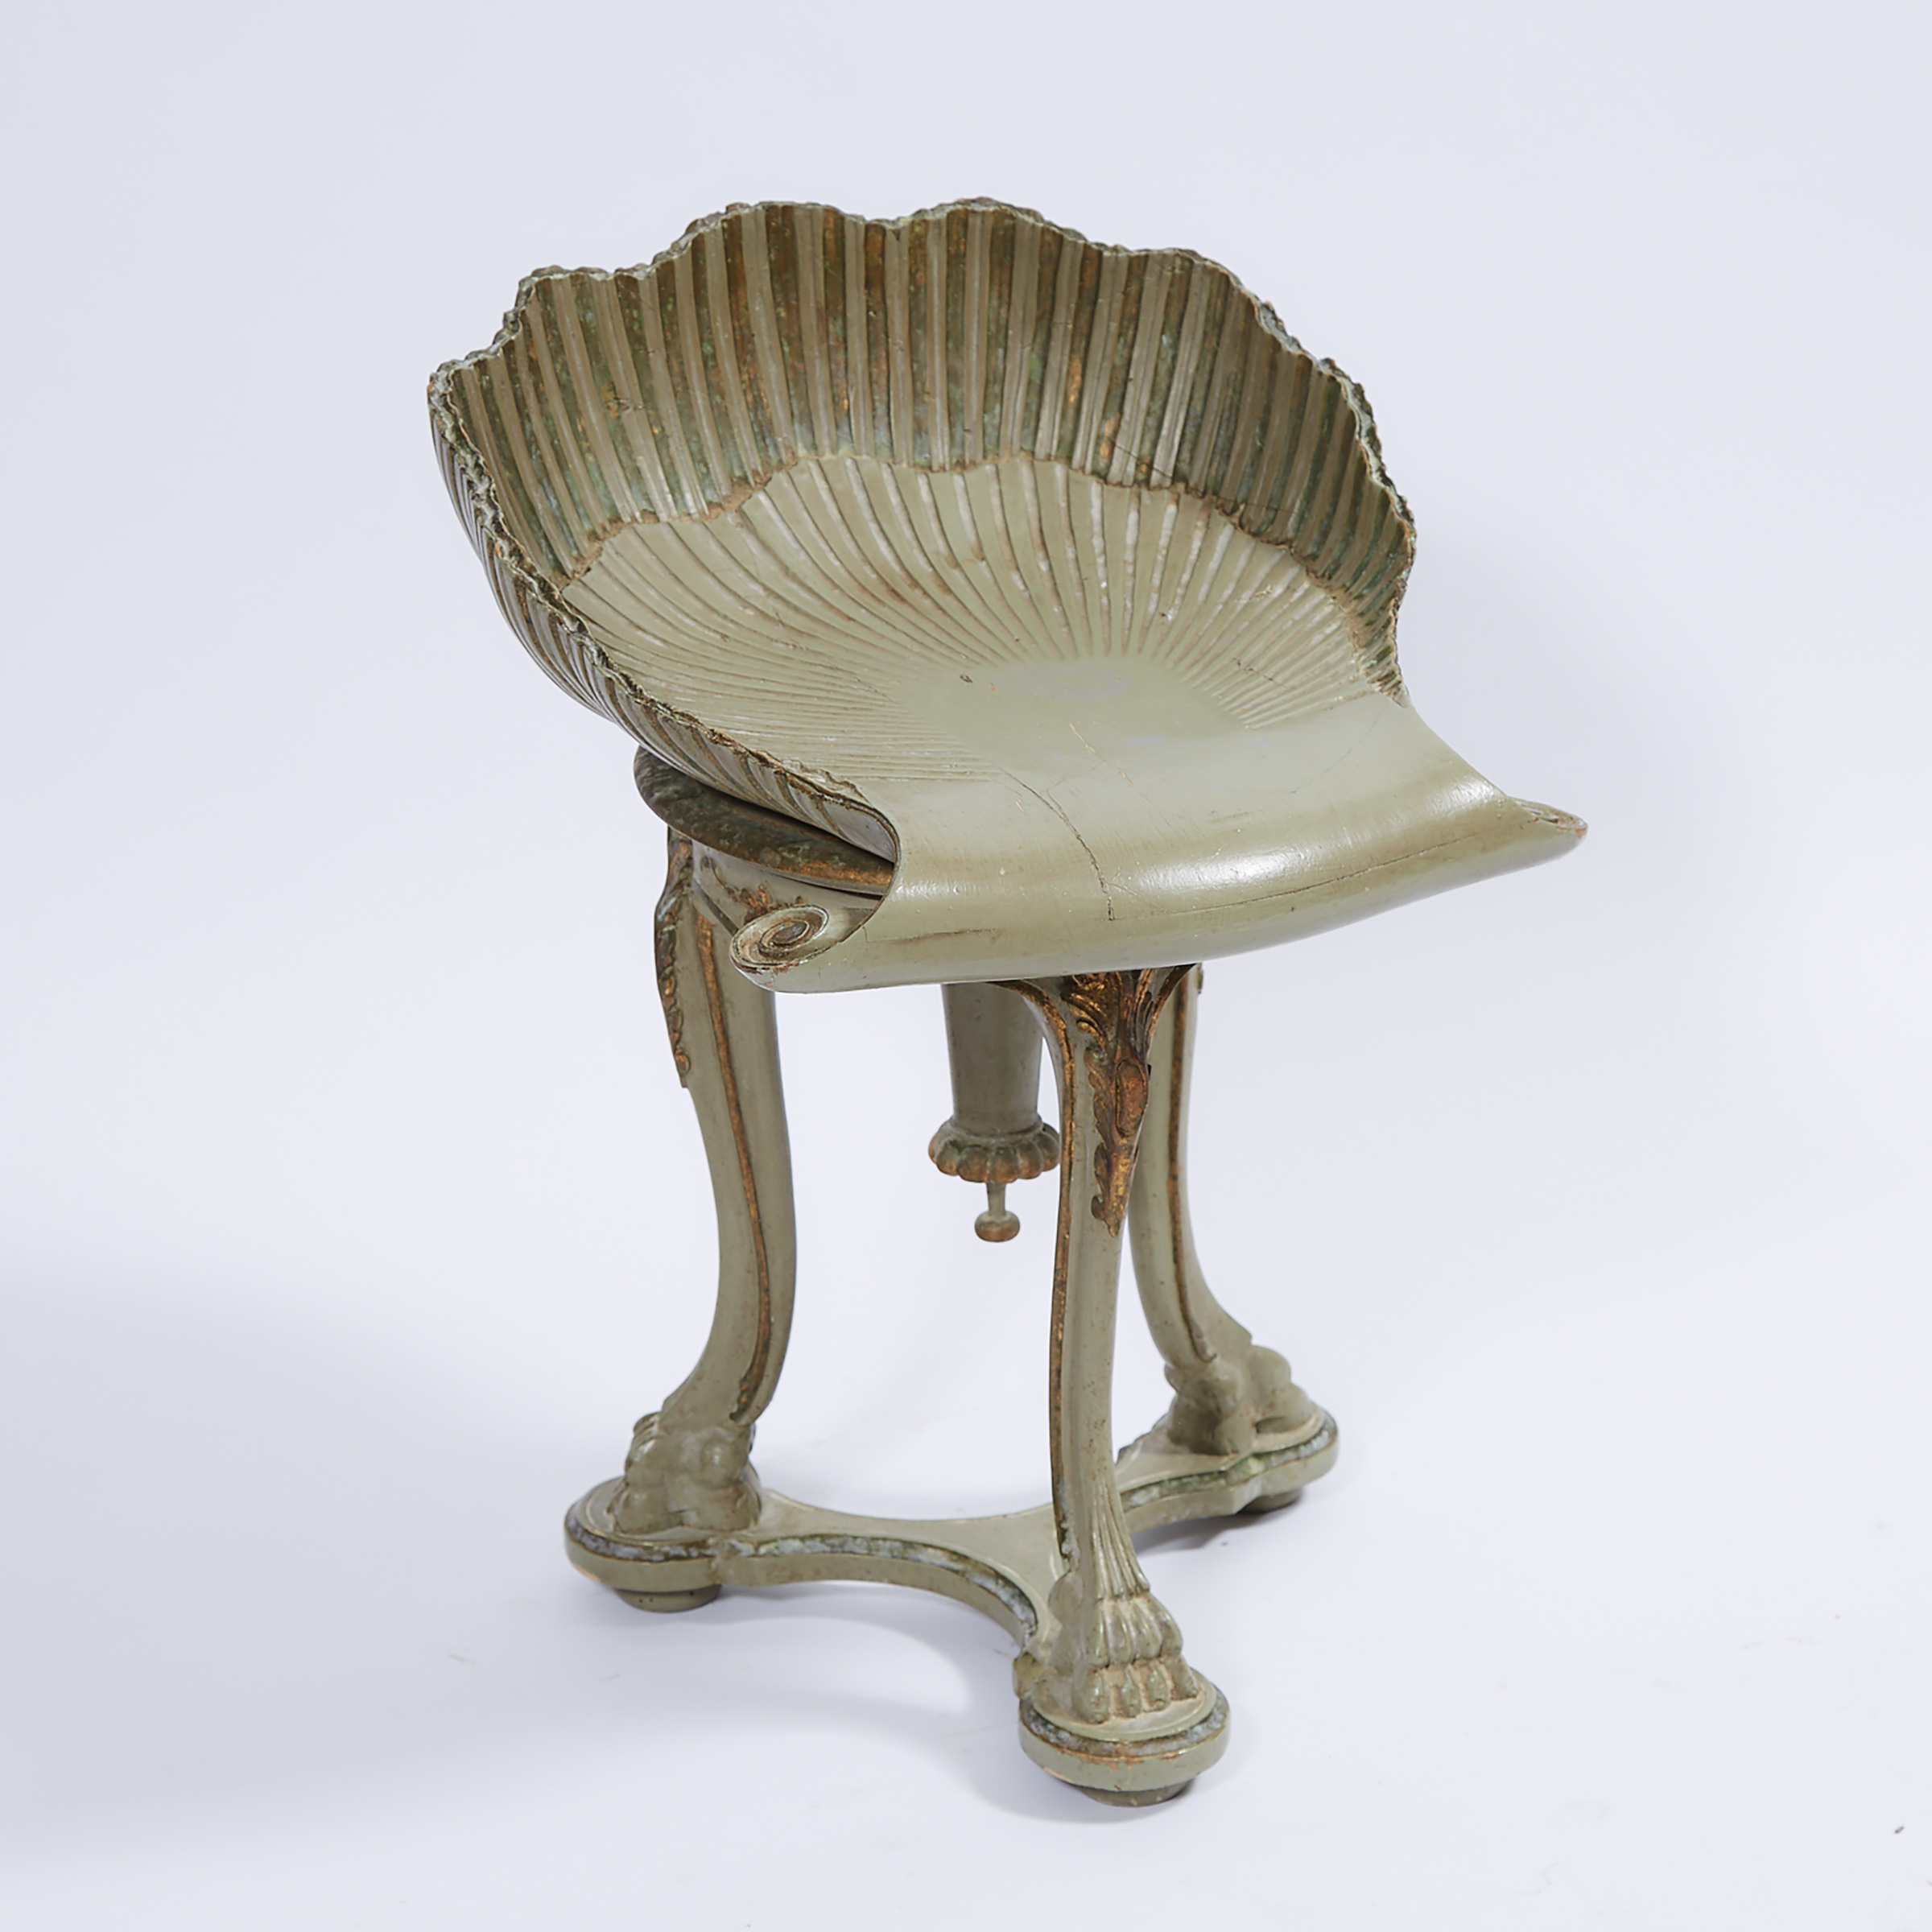 Italian Carved and Painted Grotto Stool, early 20th century